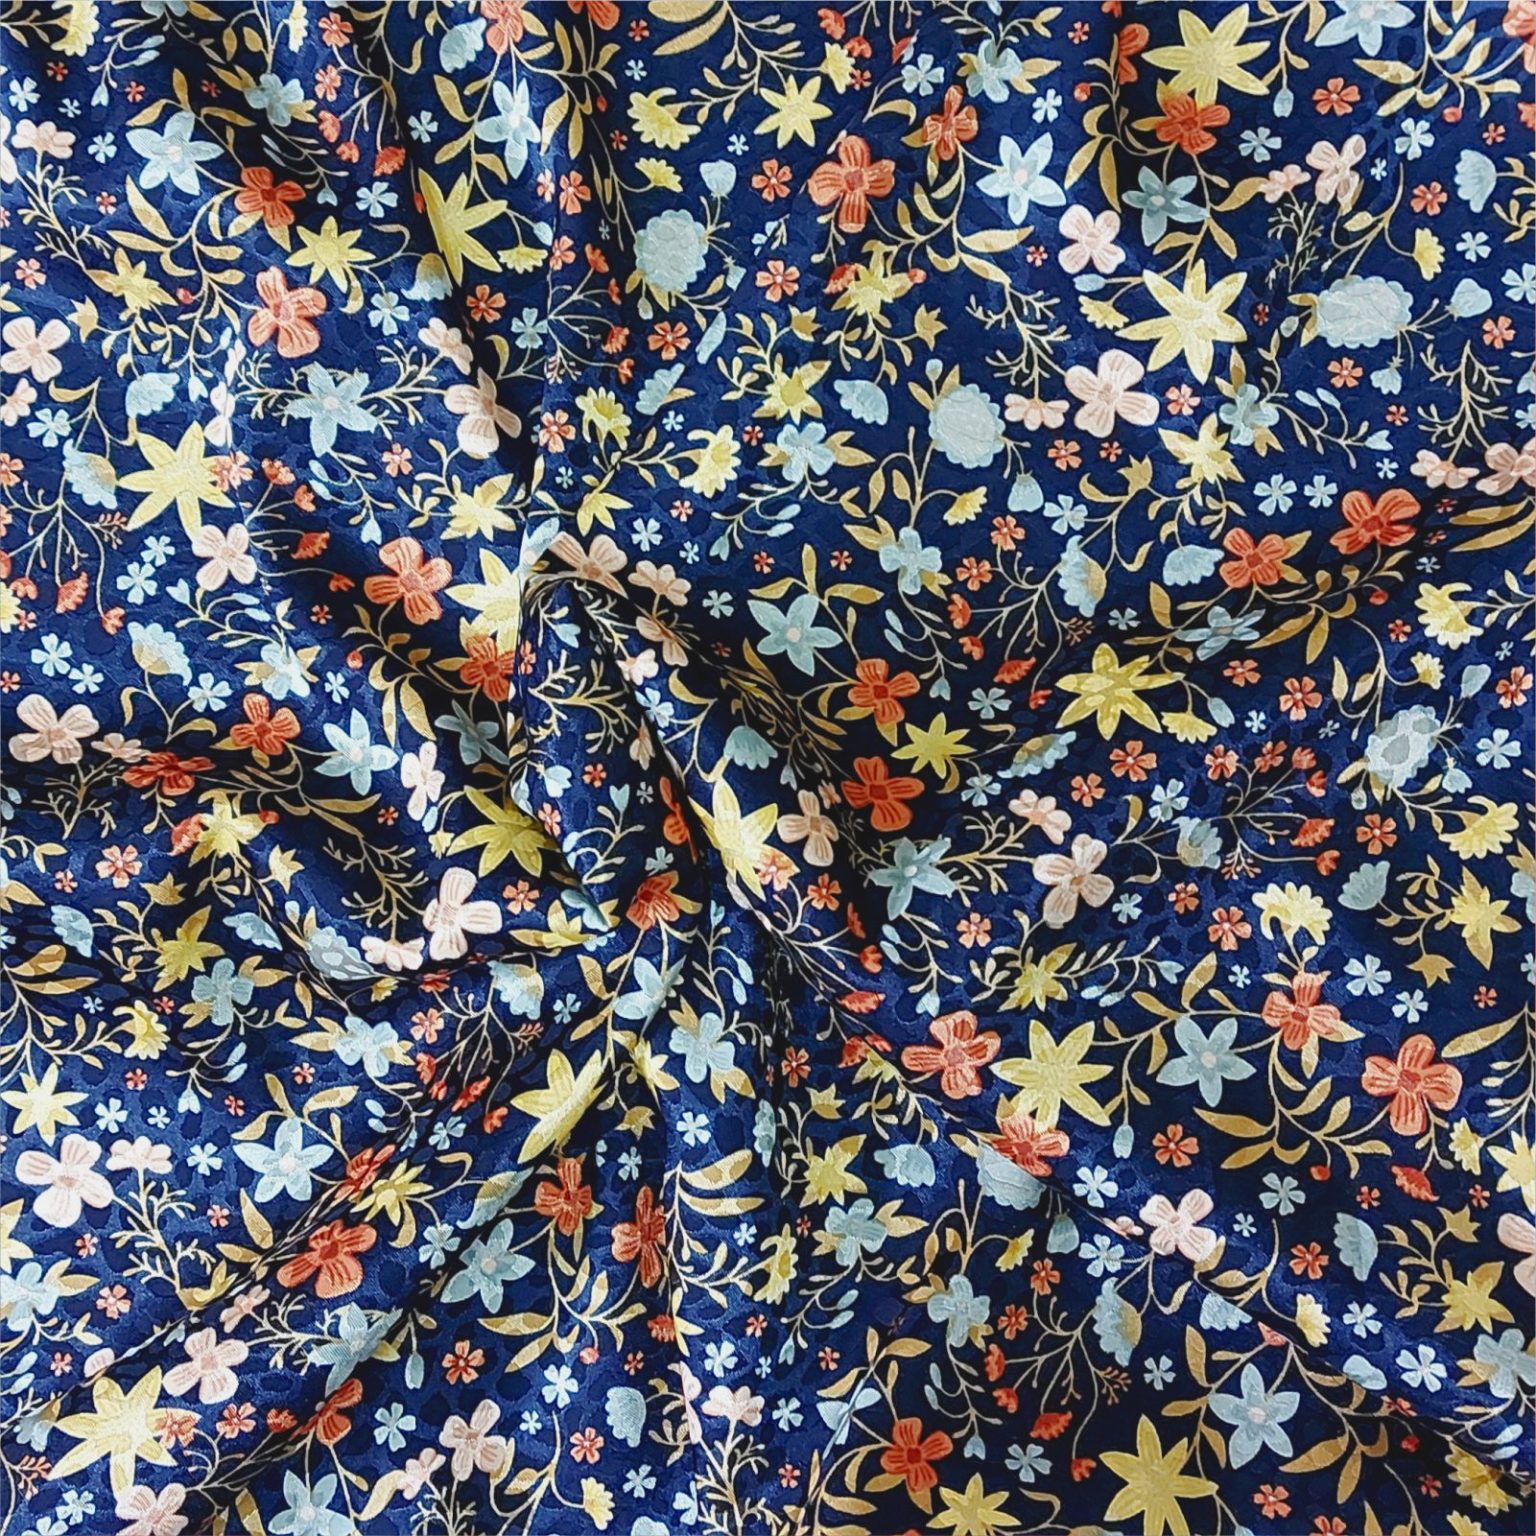 Satin Jacquard Flowers on Blue | More Sewing